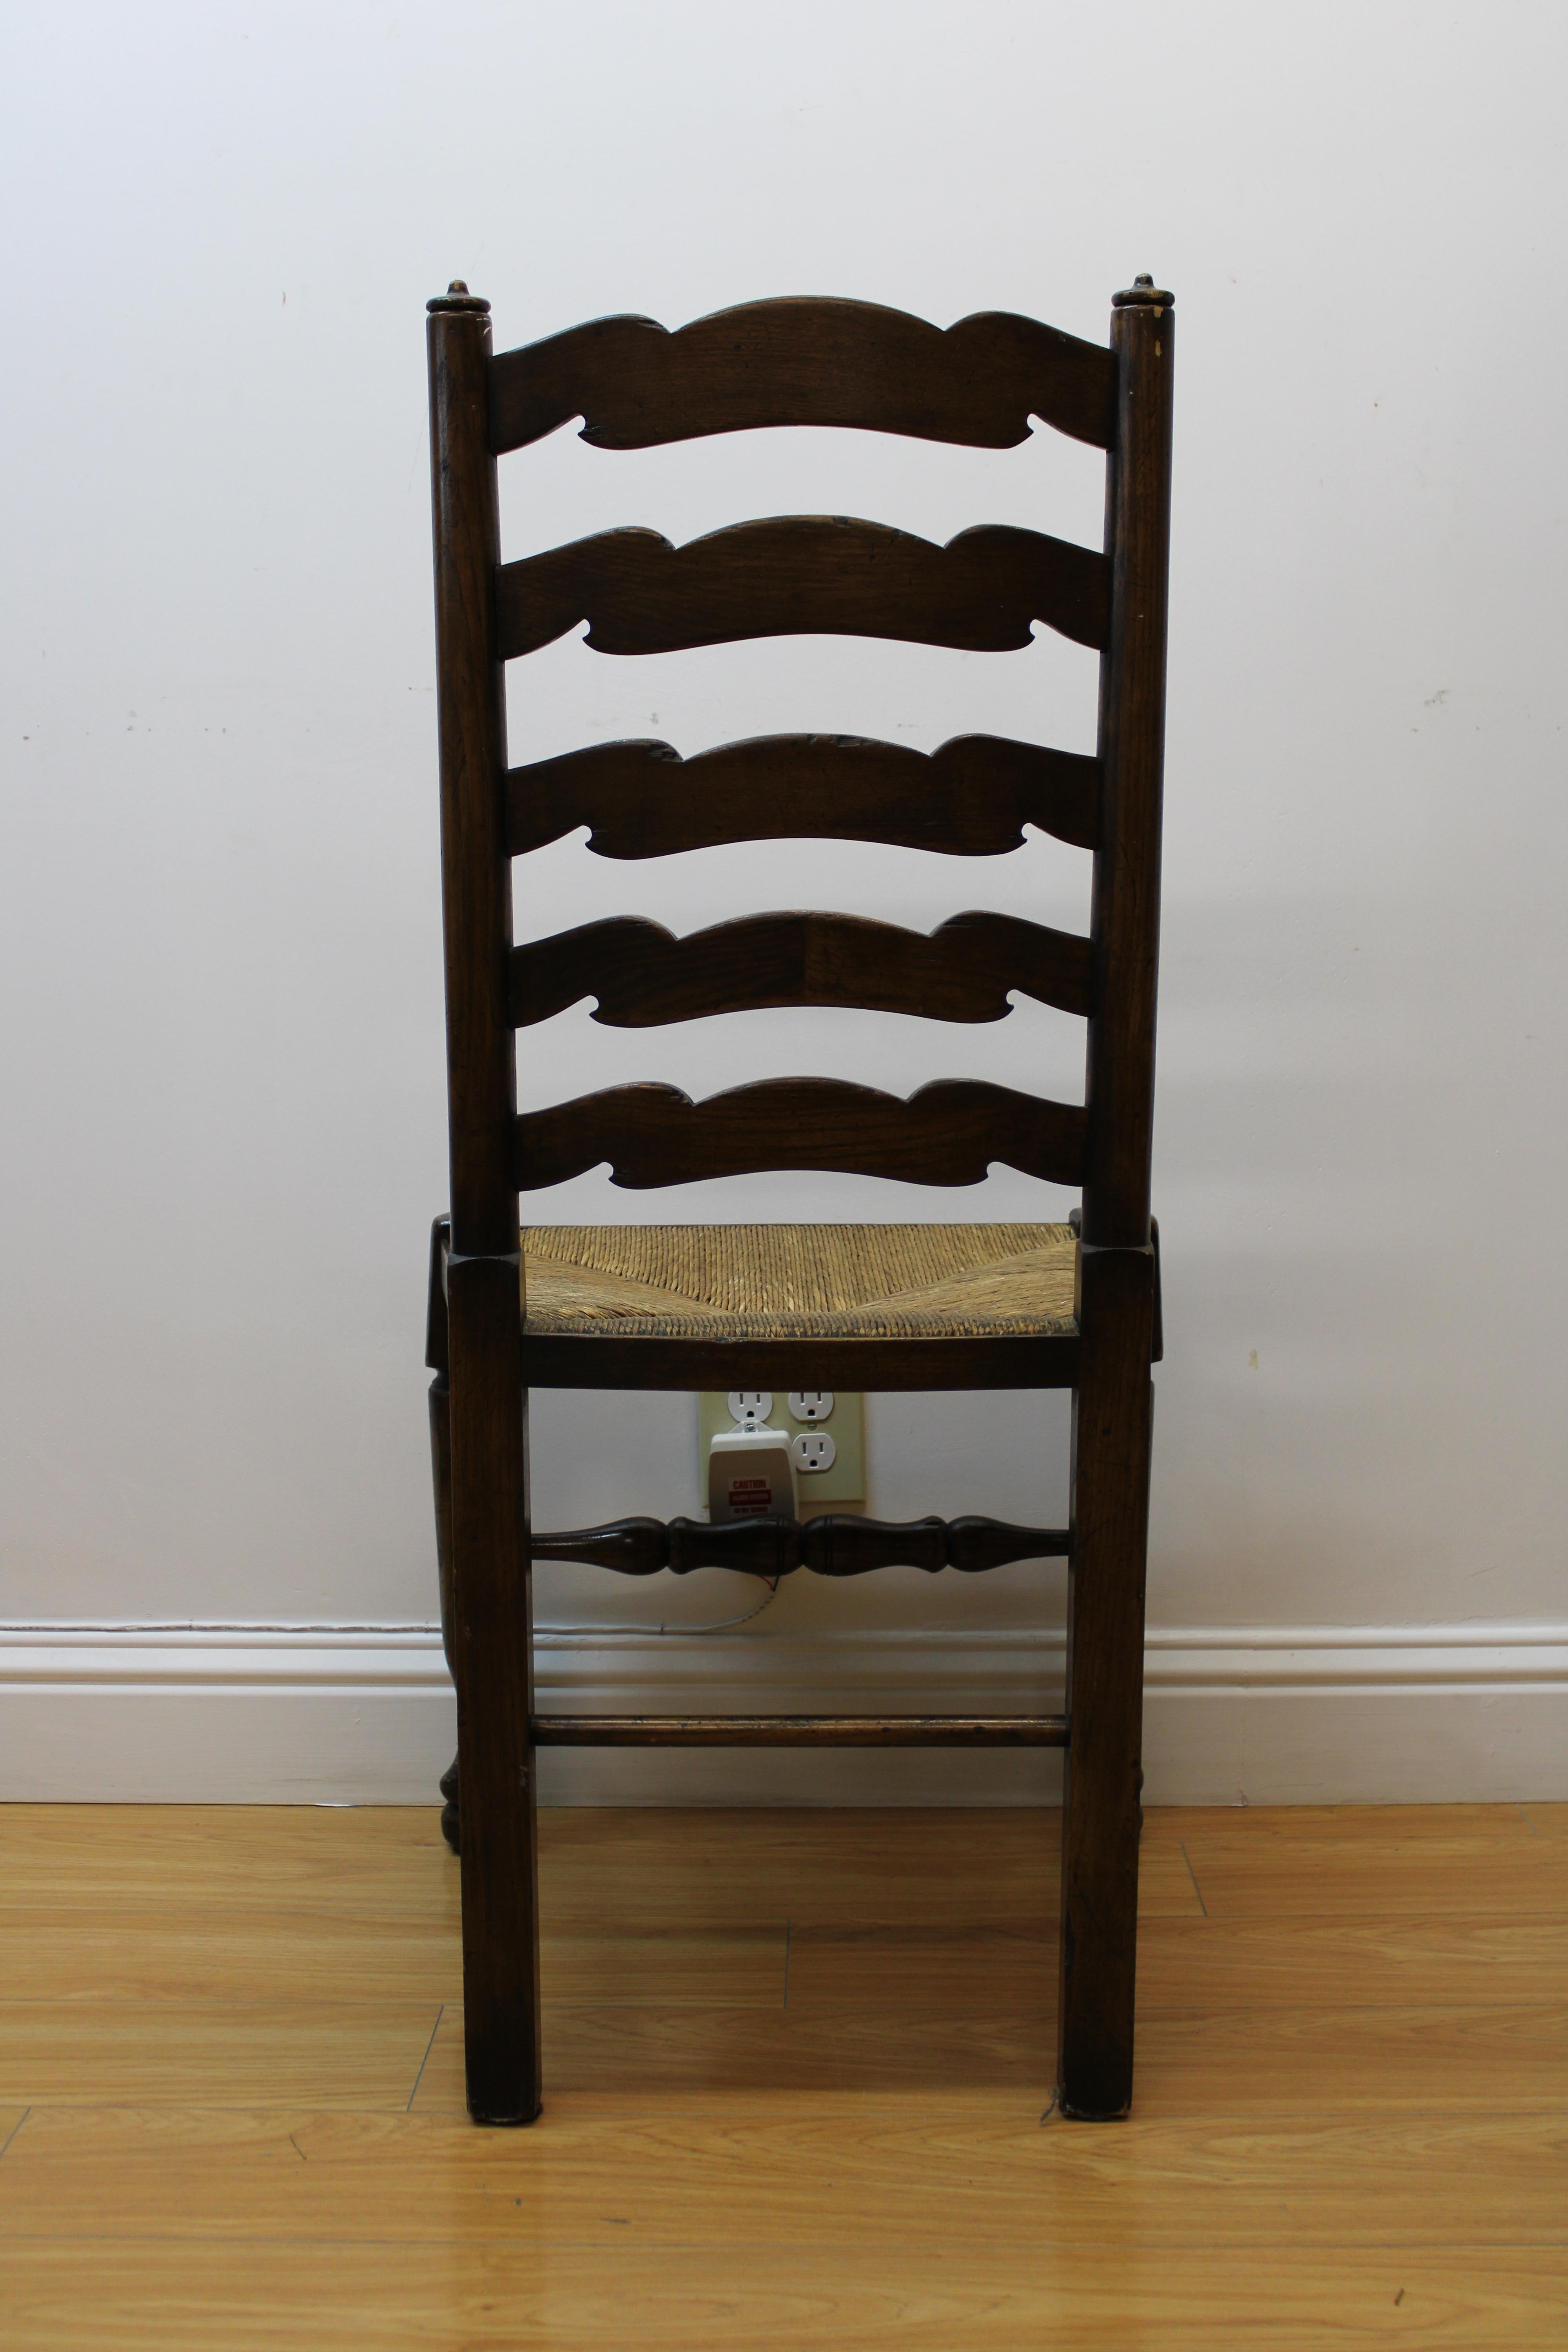 19th Century European Wood Ladderback Chairs w/ Woven Seats For Sale